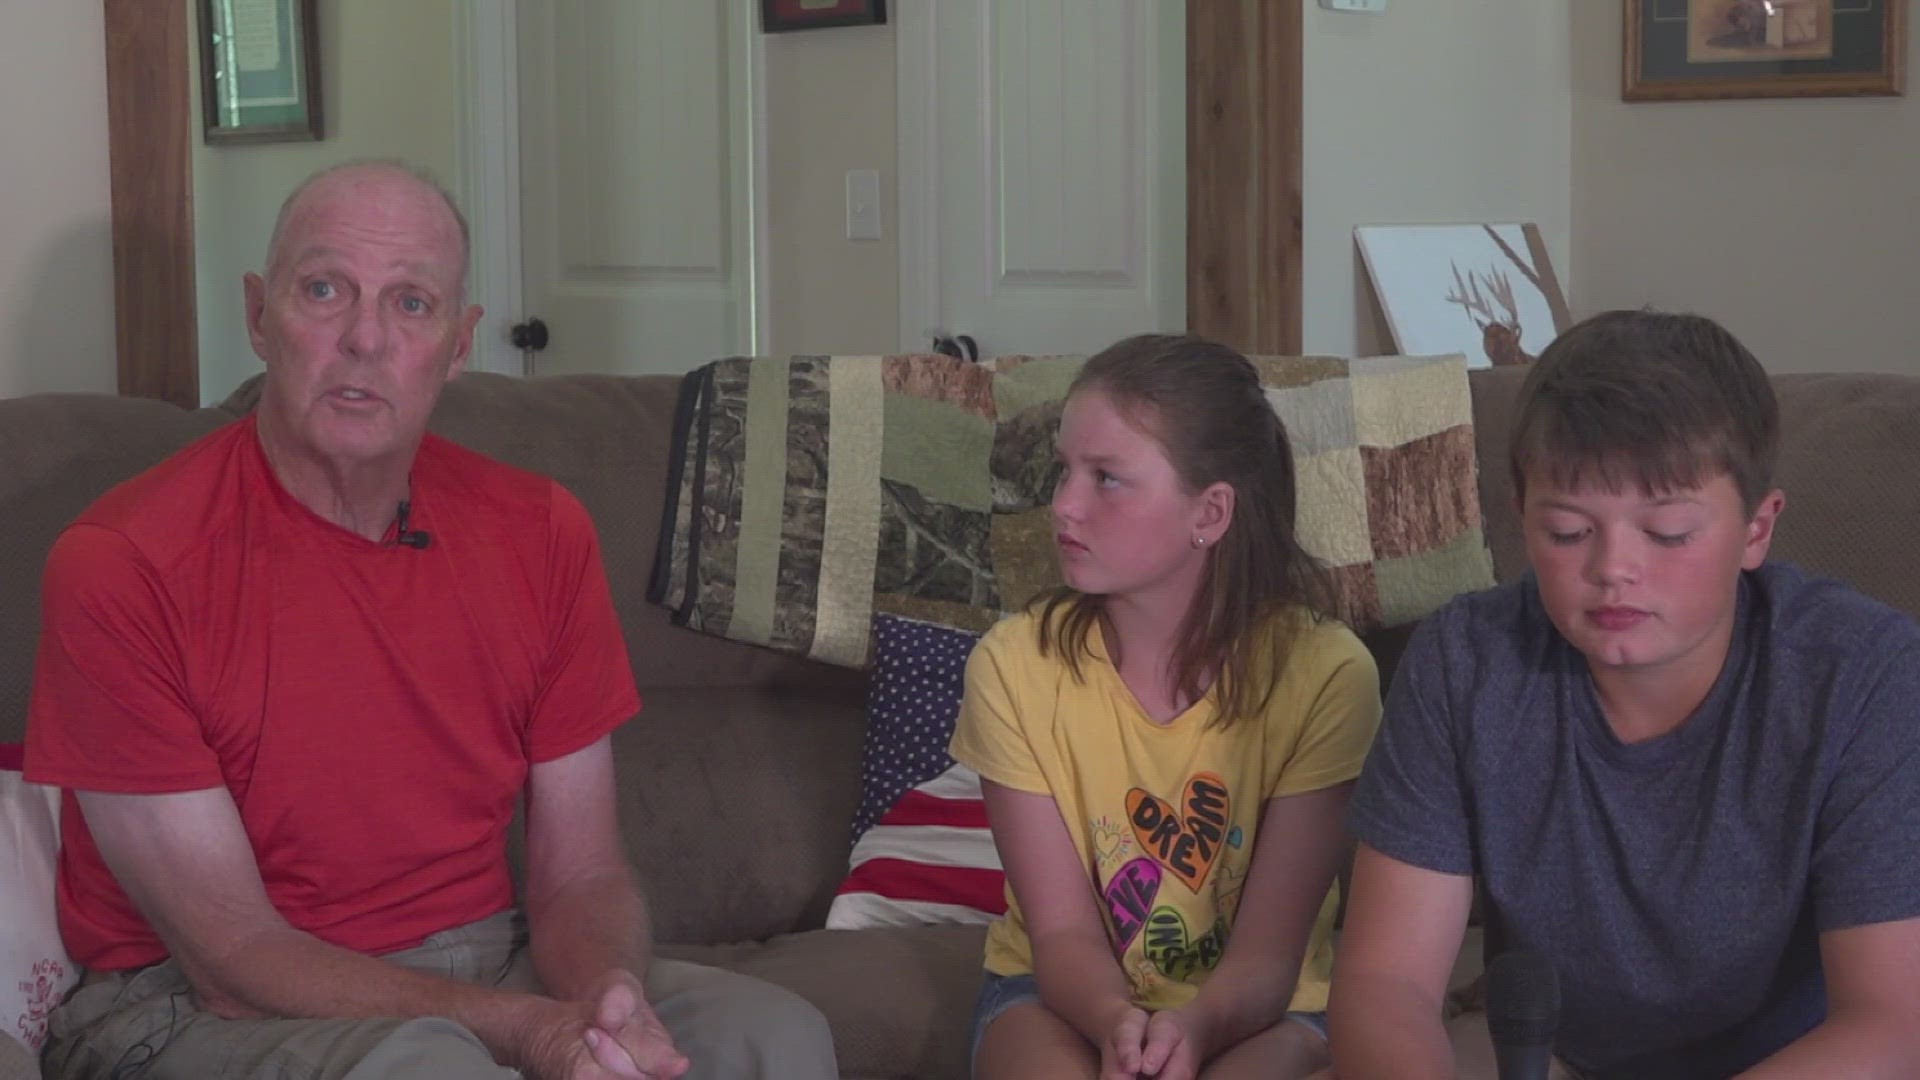 A grandfather fell down the stairs. These kid’s quick thinking might have saved his life.